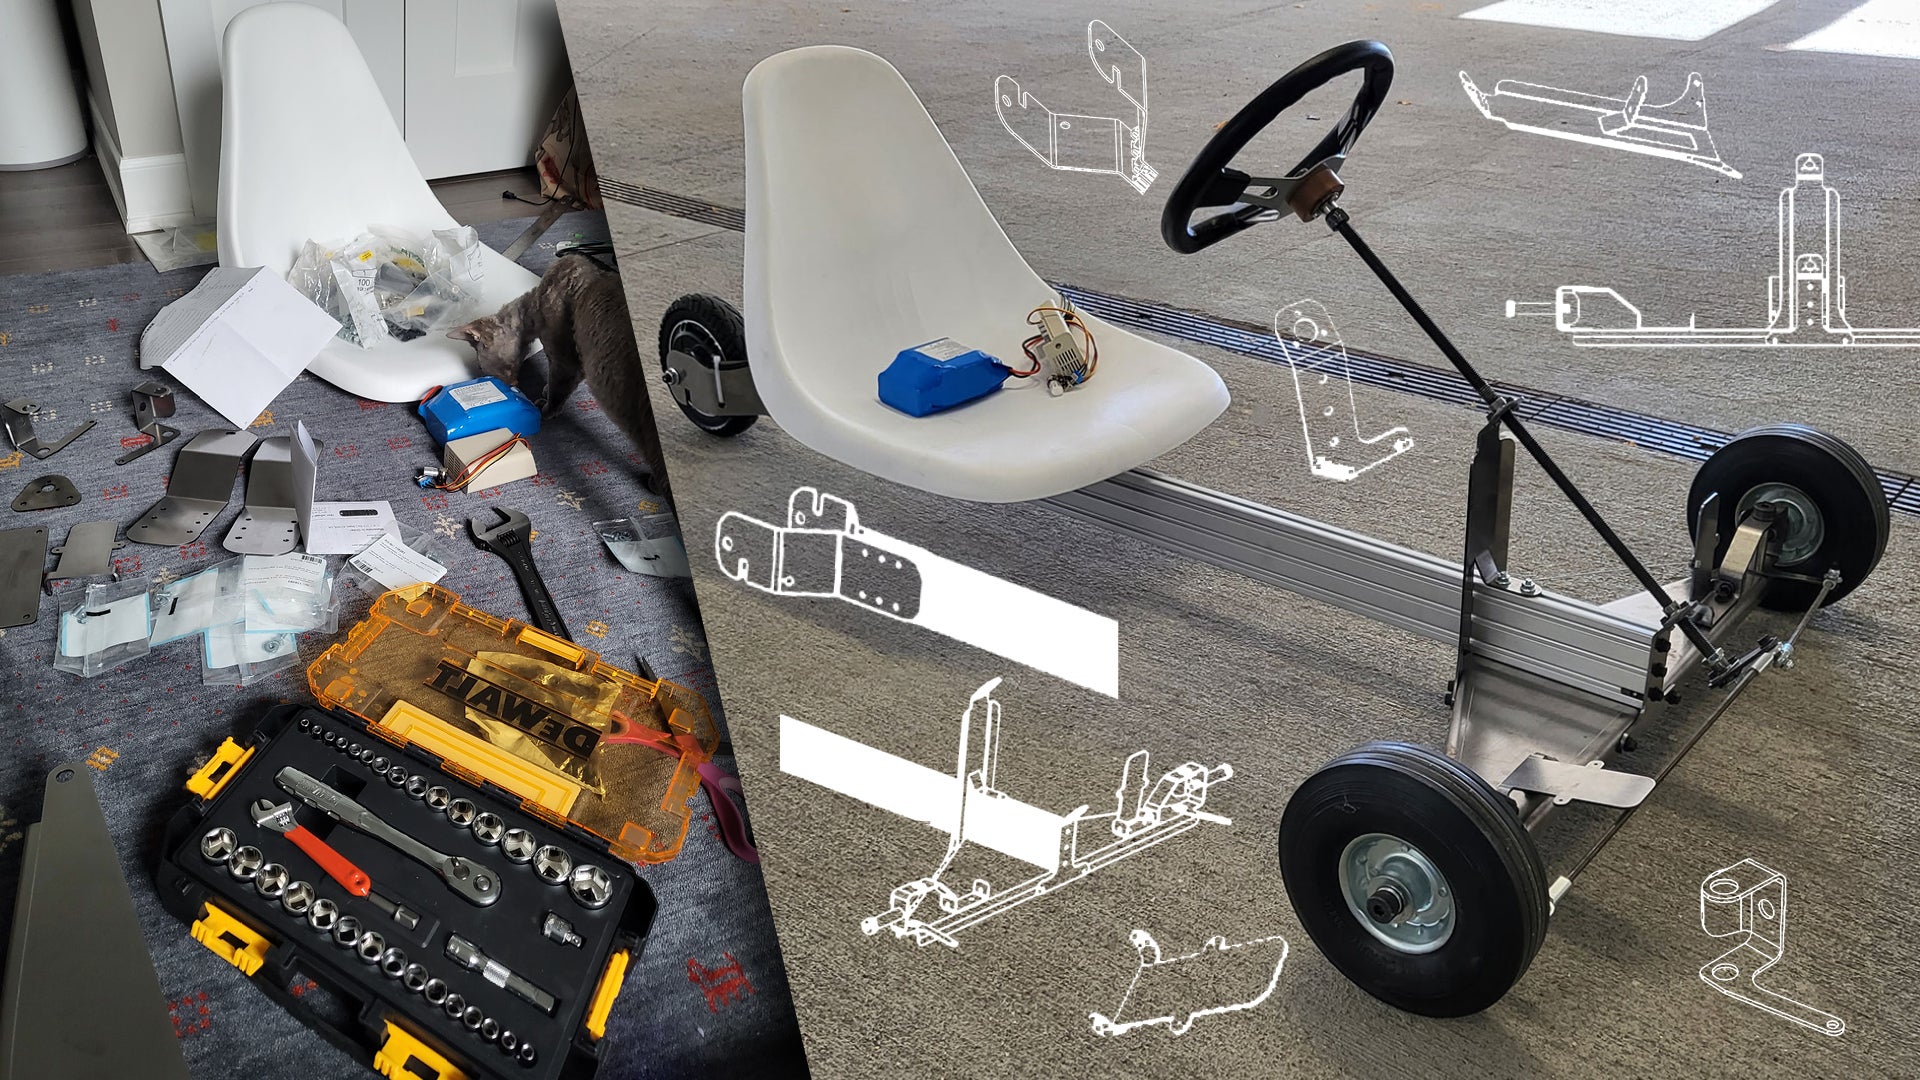 How I Designed and Built My Own Cheap Electric Go-Kart